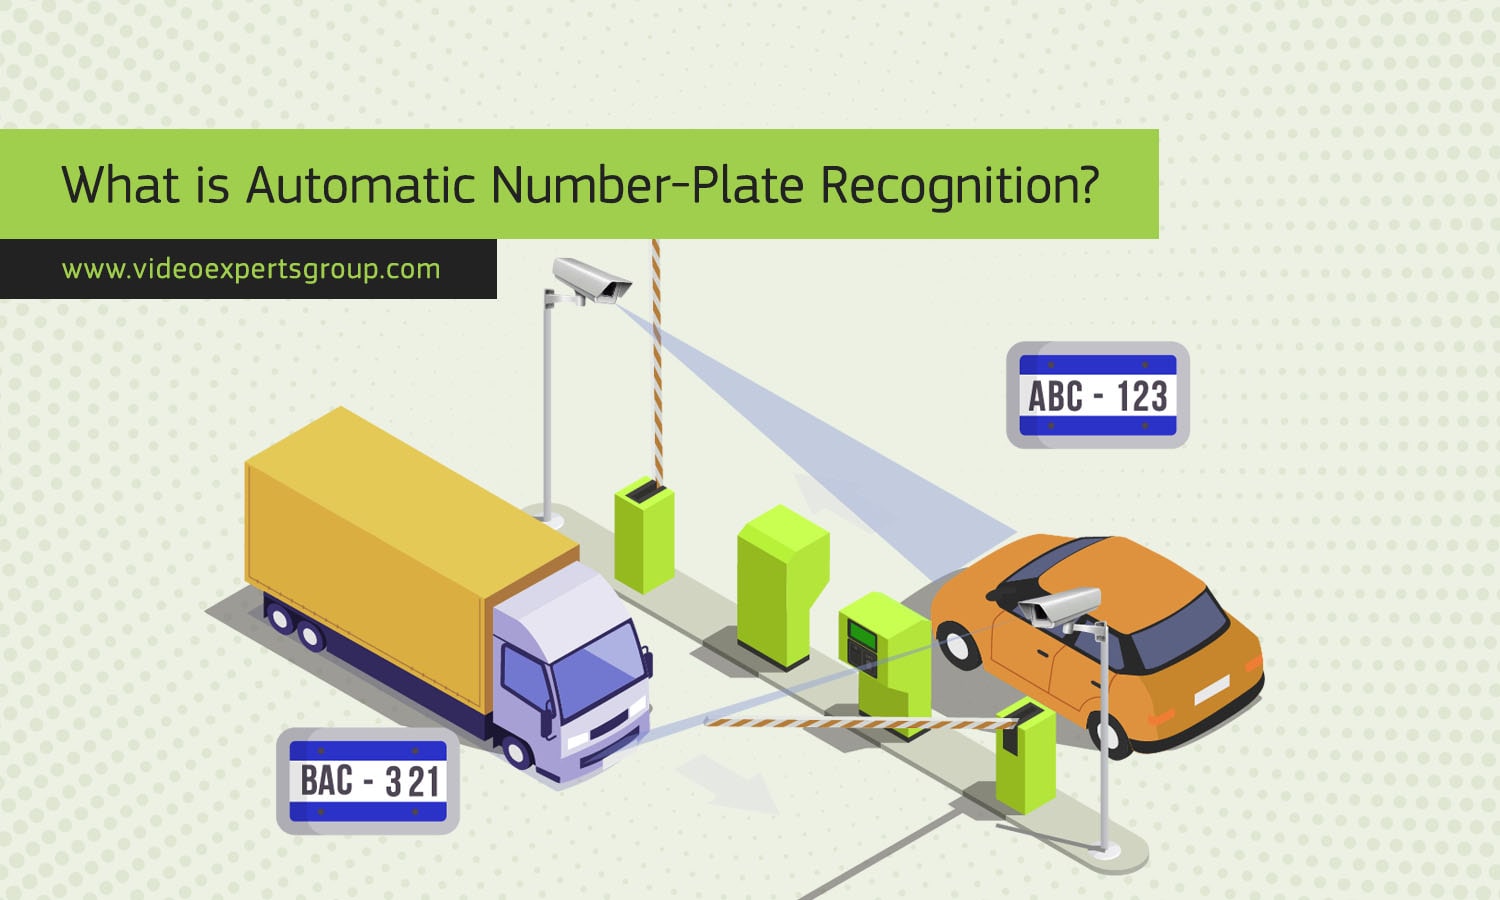 What is Automatic Number-Plate Recognition (ANPR/ALPR)?